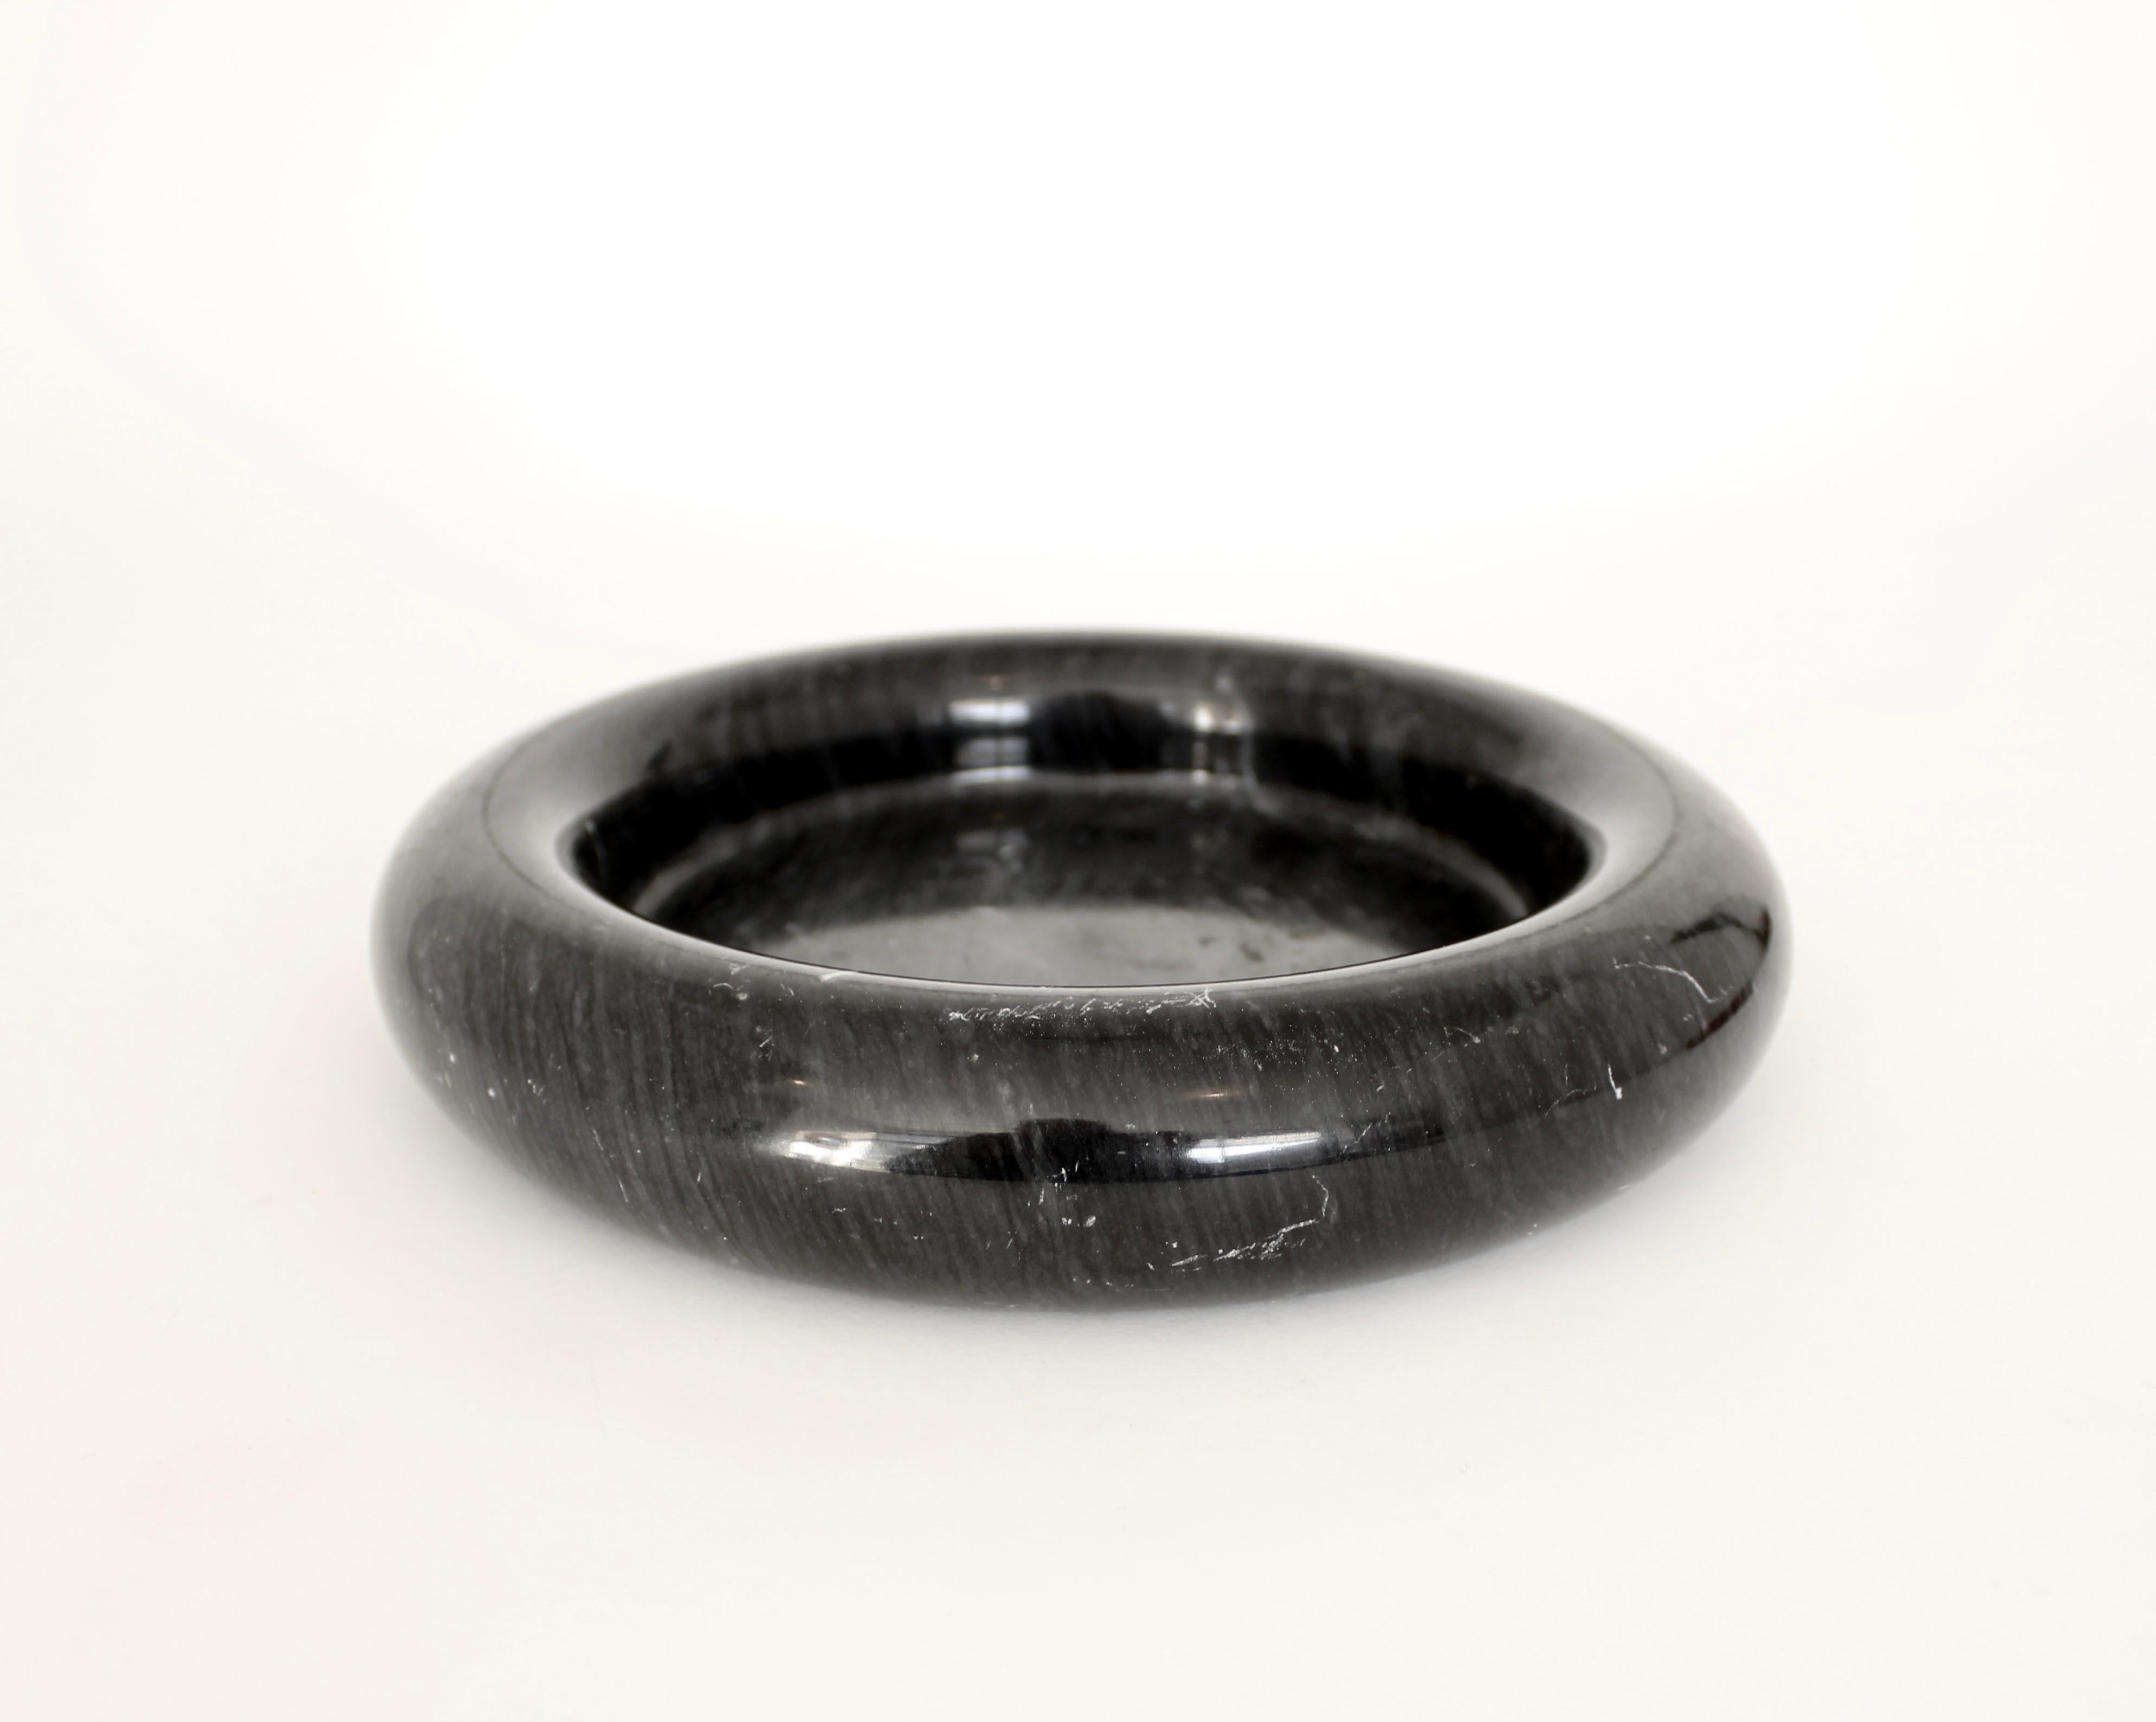 Black marble dish or vide poche designer by Egidio Di Rosa and Pier Alessandro Giusti for Up&Up International, Italy, circa 1960-1970.
The dish in polished black marble has a rolled edge.
One minor scratch in the flat part of the dish.